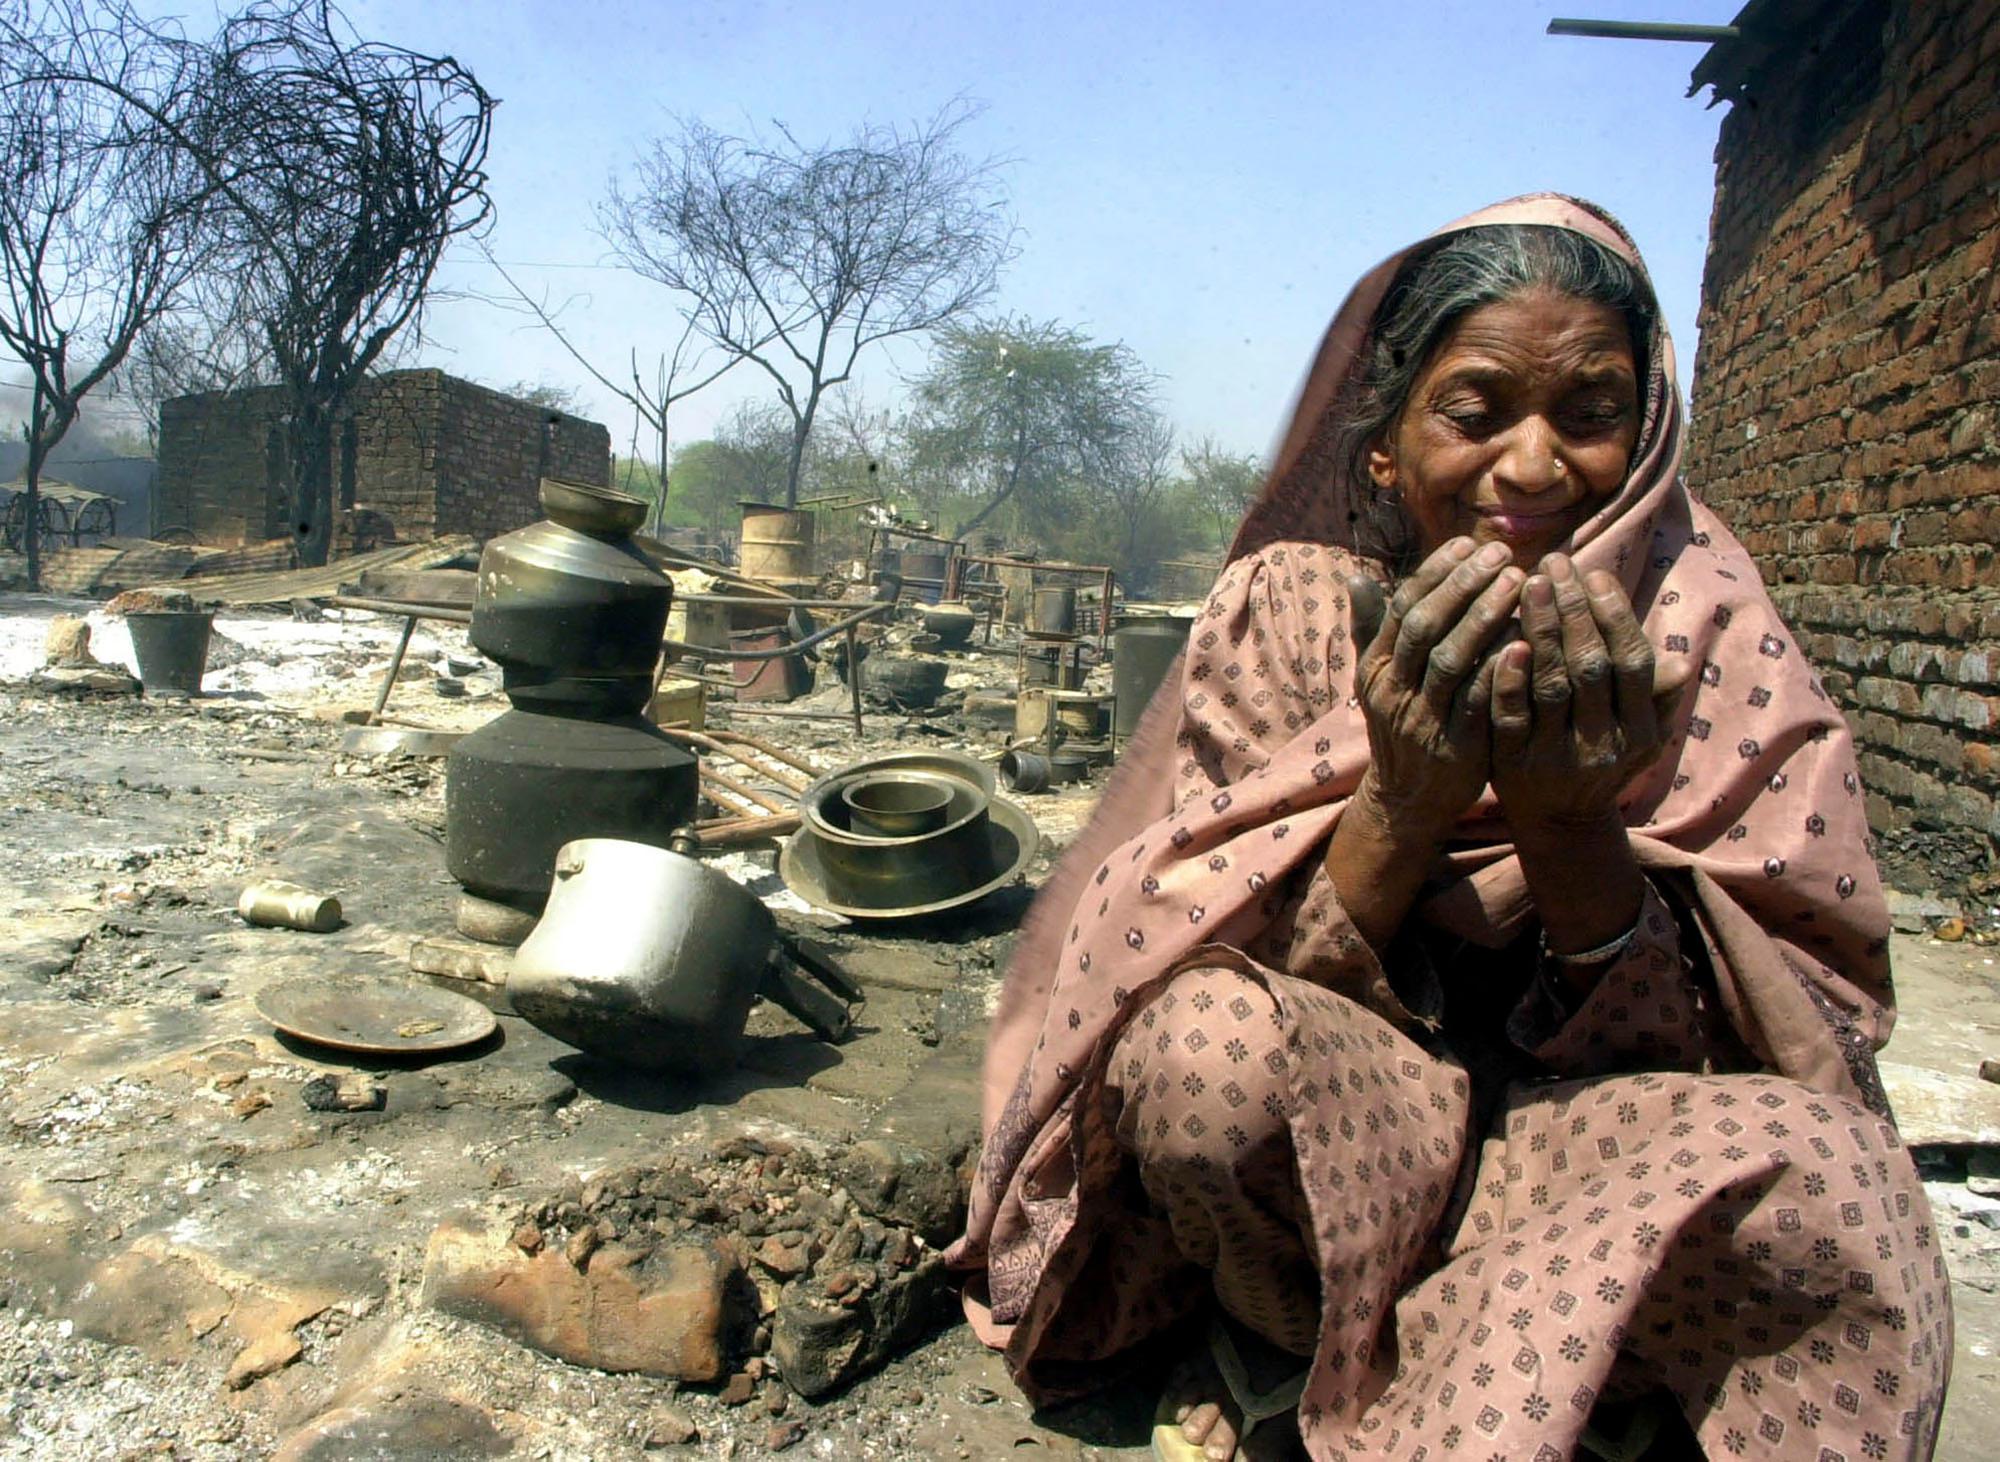 FILE - Razia, a Muslim woman, cries while praying by her destroyed home near Ahmedabad, India, March 2, 2002. Vengeful Hindu mobs torched Muslim homes, killing scores, as rioting spread through western Gujarat state leading to the death of at least 1,000 in one of India's worst religious strife. (AP Photo/Aman Sharma, File)